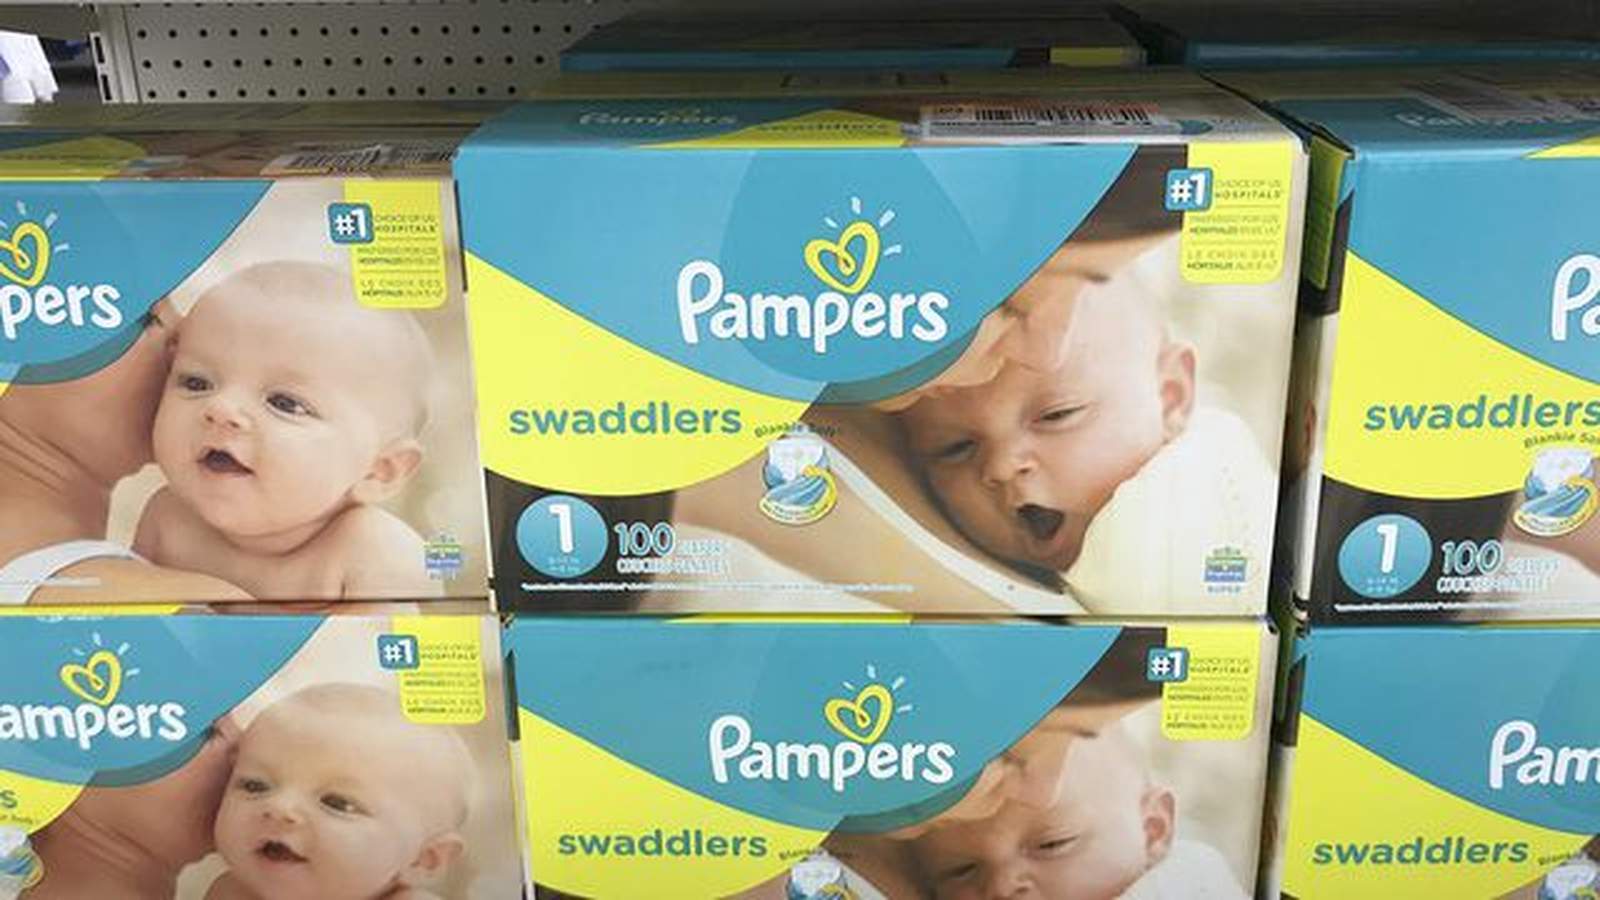 Texas Diaper Bank asks for donations due to effects of coronavirus